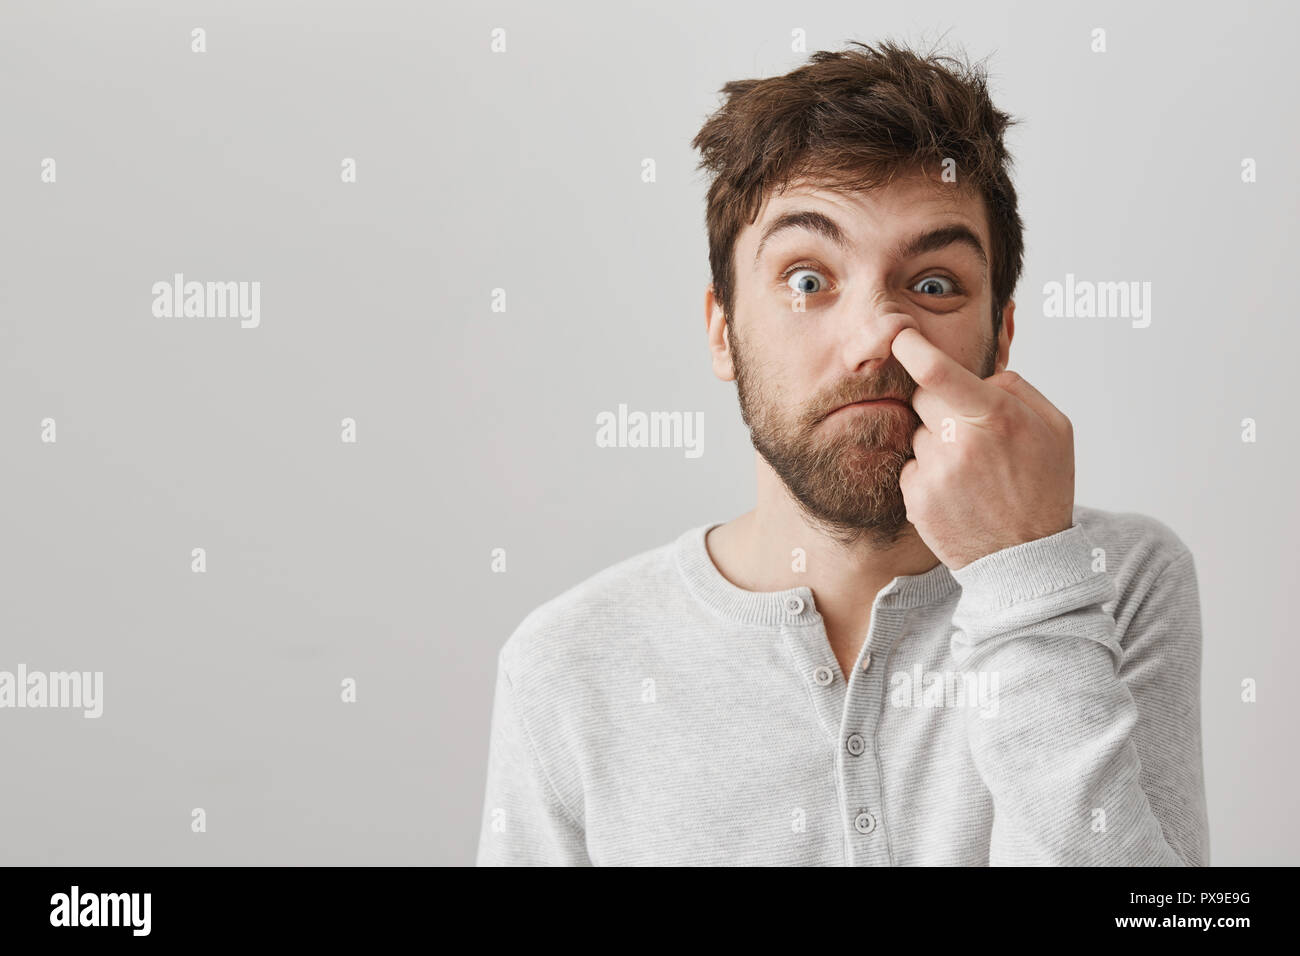 Funny bearded guy with messy hair and bad habits, staring at camera with stupid face, picking in nose with index finger and standing over gray background. Mature geek does not know about hygiene Stock Photo